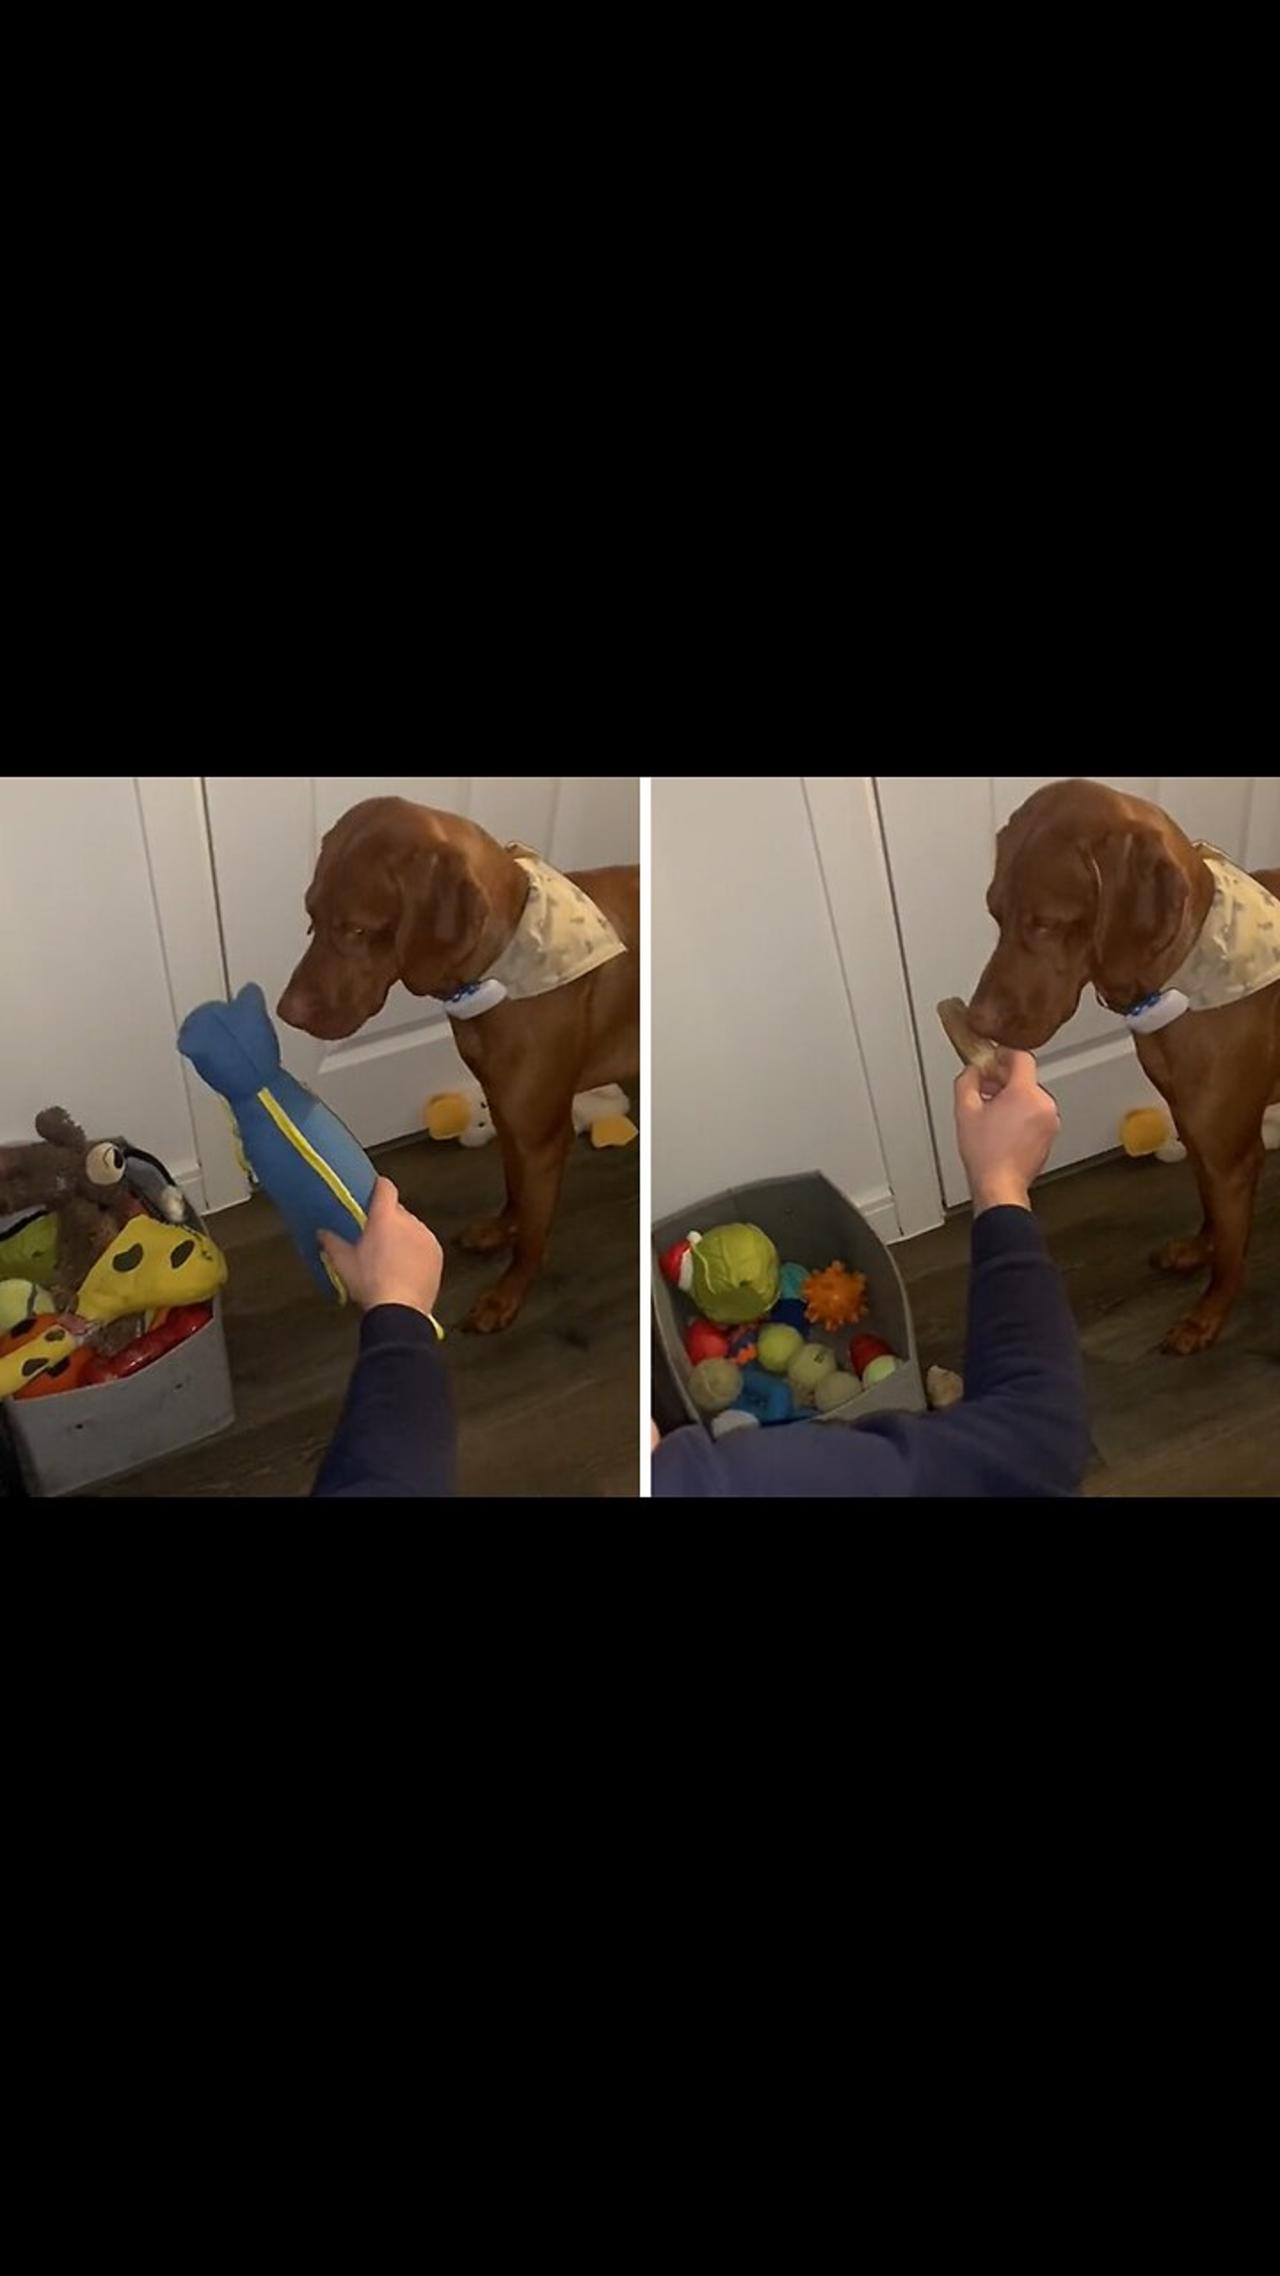 Smart dog knows which toys to choose and which to ignore